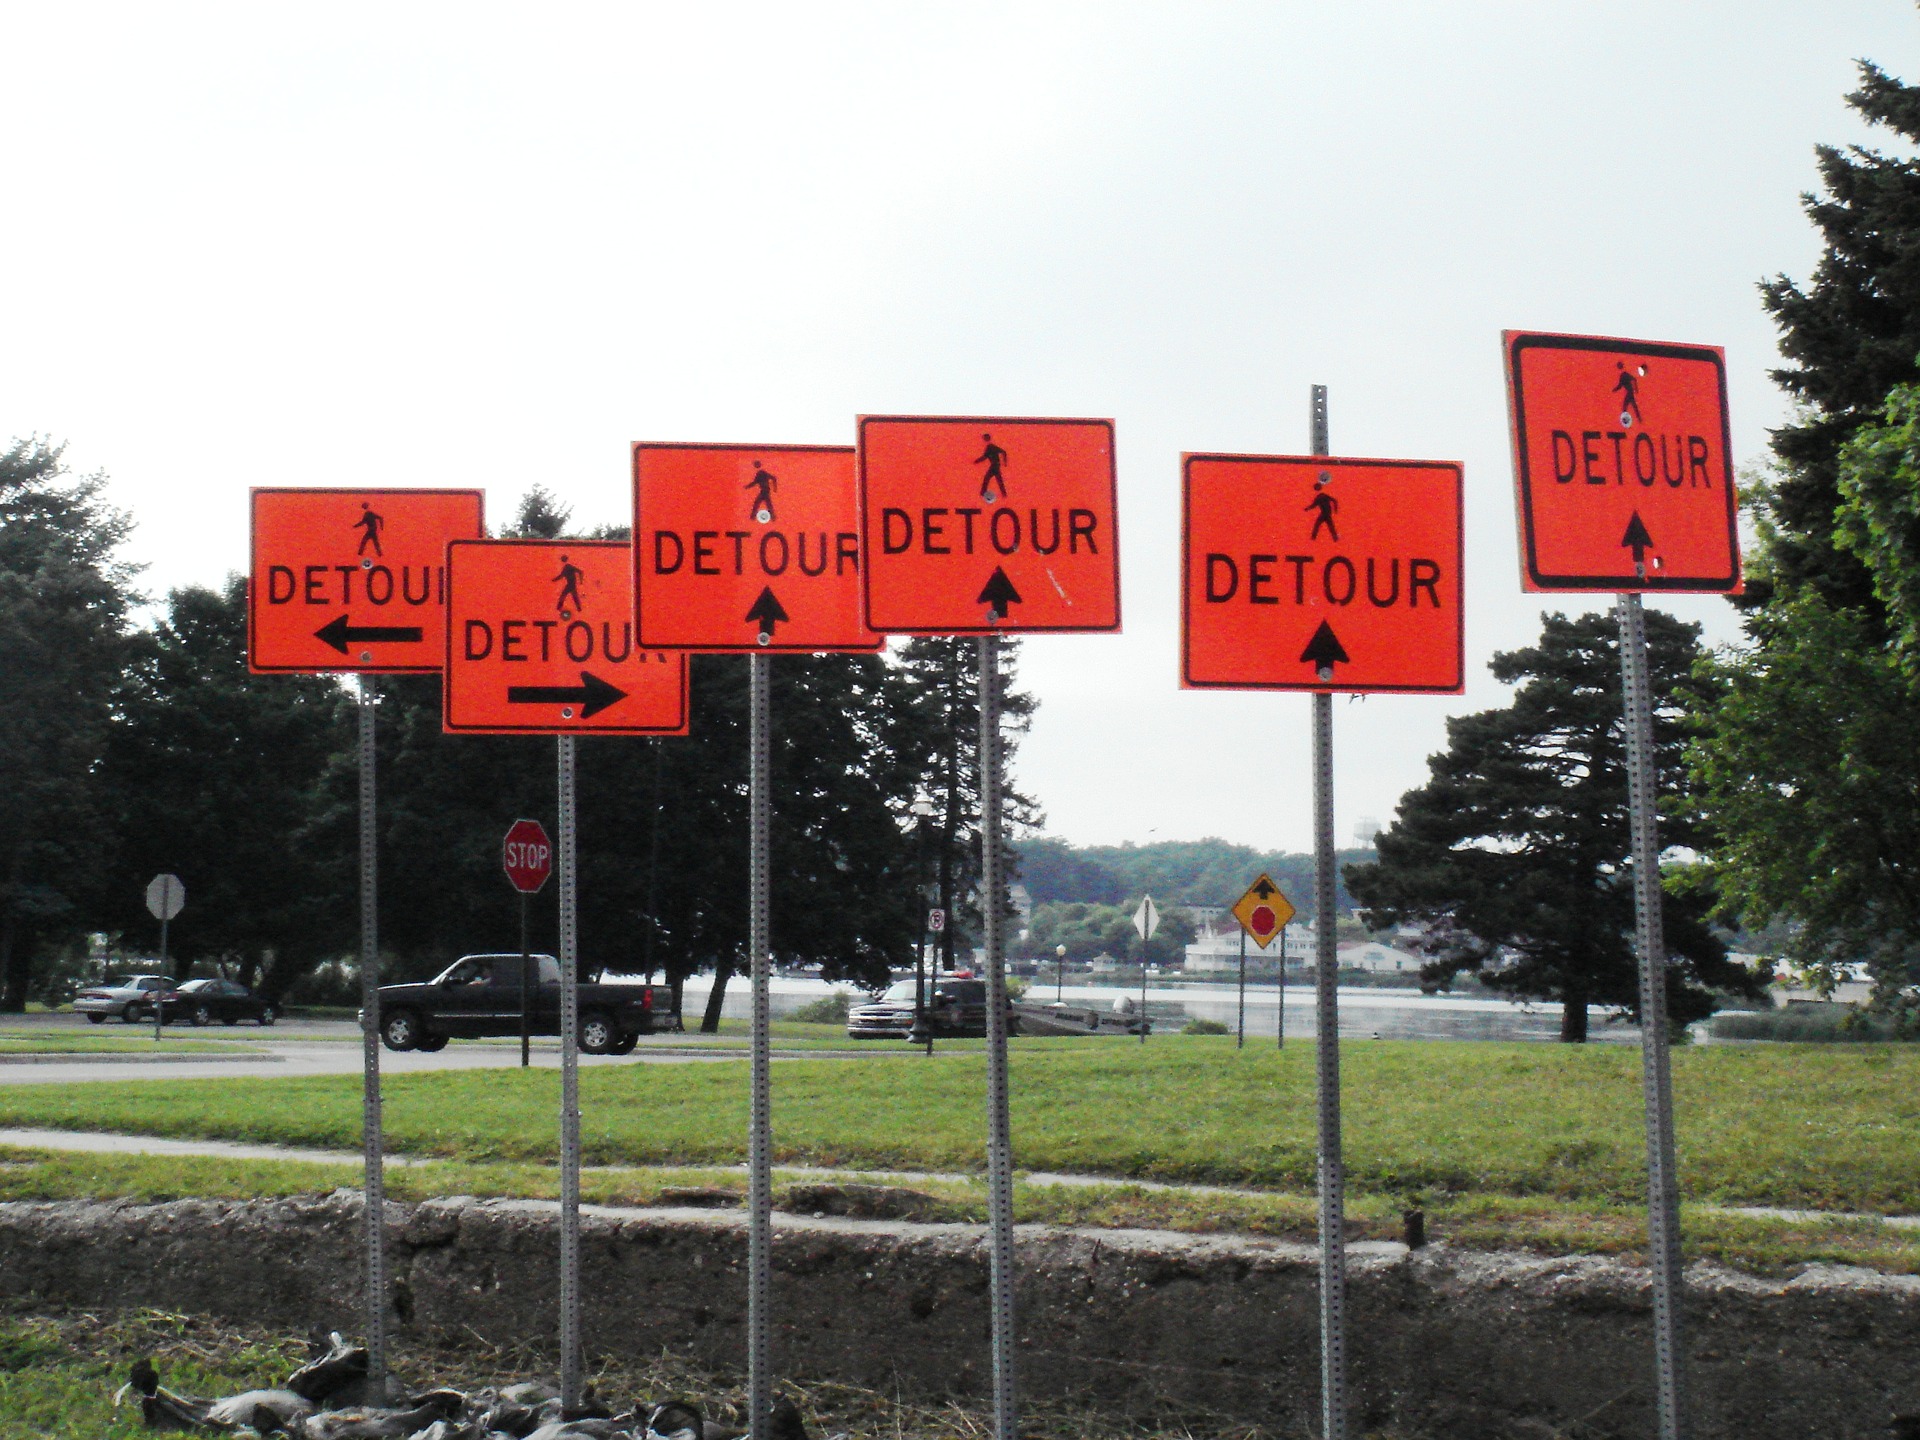 Several detour signs with different arrows facing different directions.